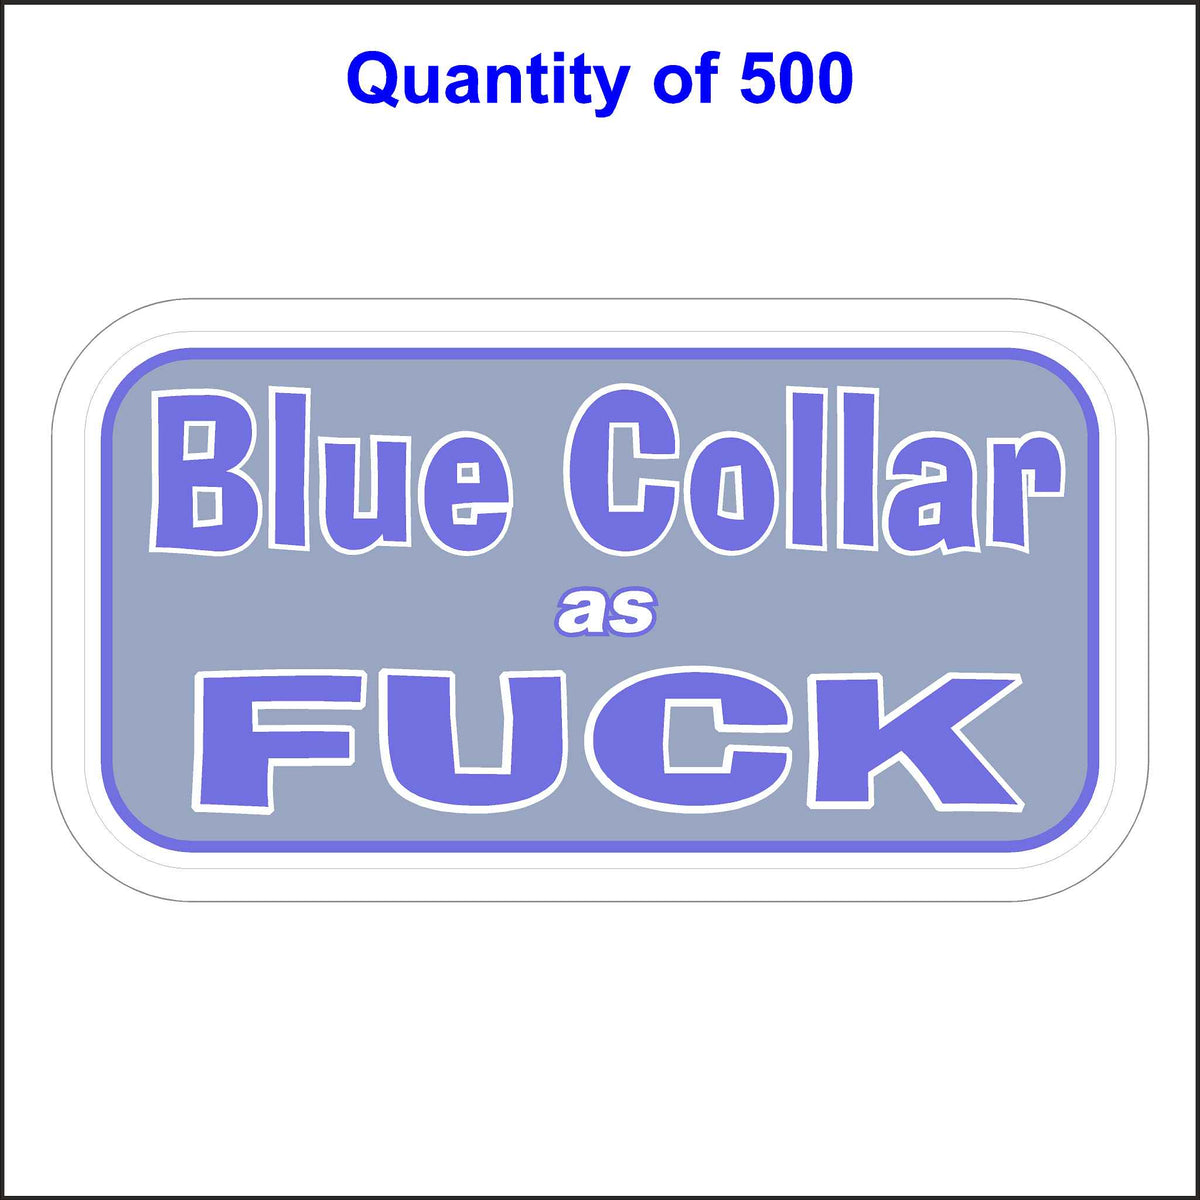 Blue Collar Stickers. This Blue Collar Sticker Has The Words, Blue Collar as Fuck. 500 Quantity.